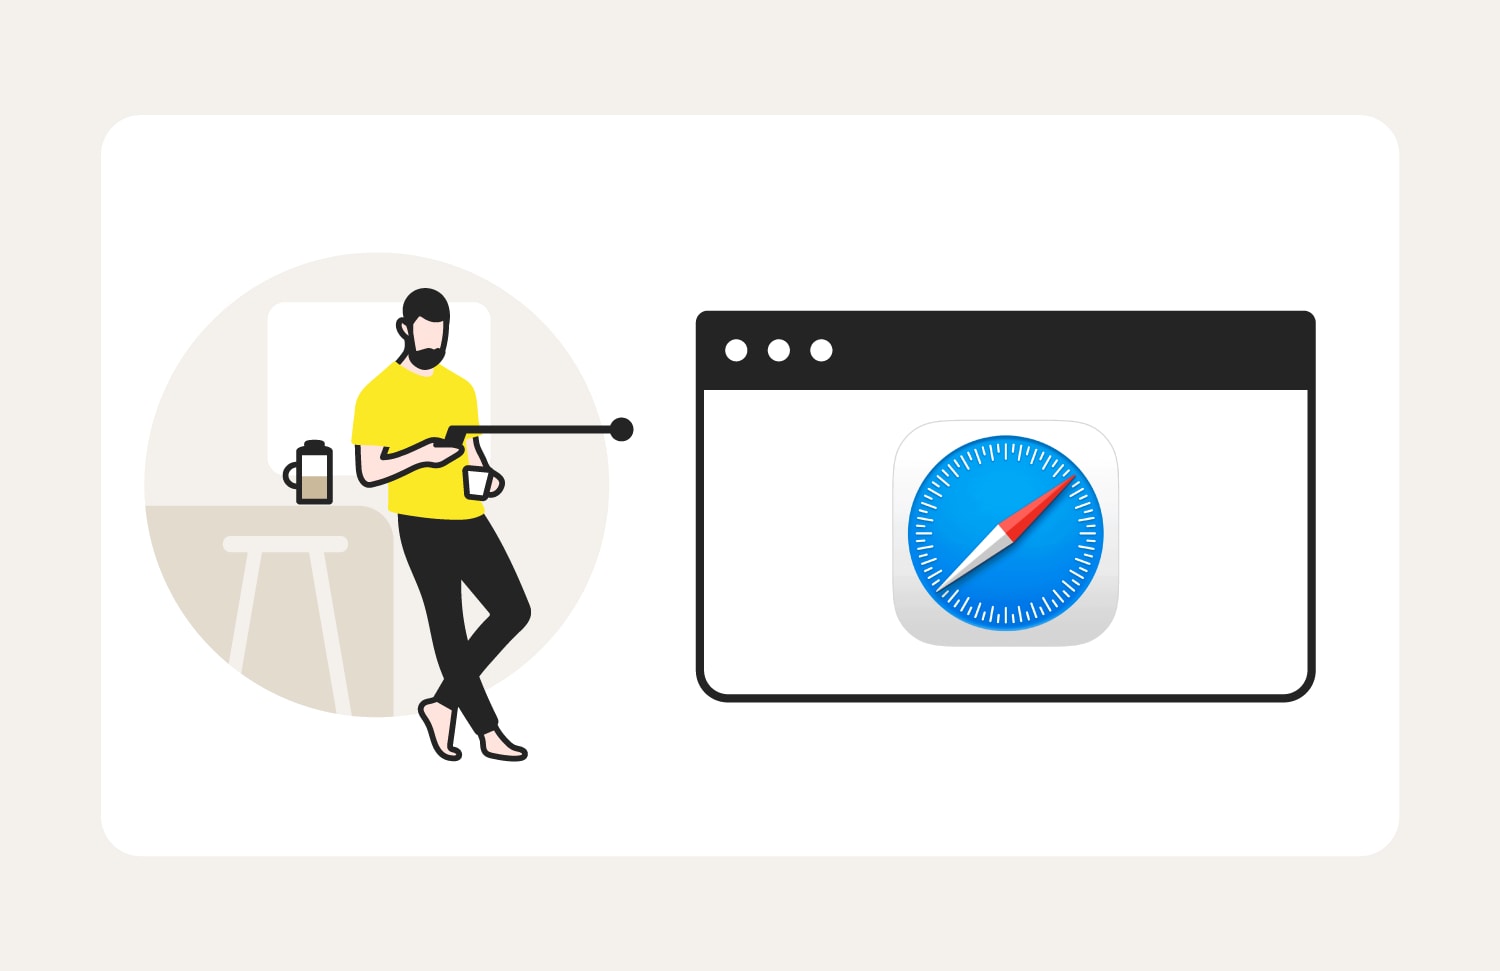 An illustration introduces the steps for how to clear cookies on Safari.